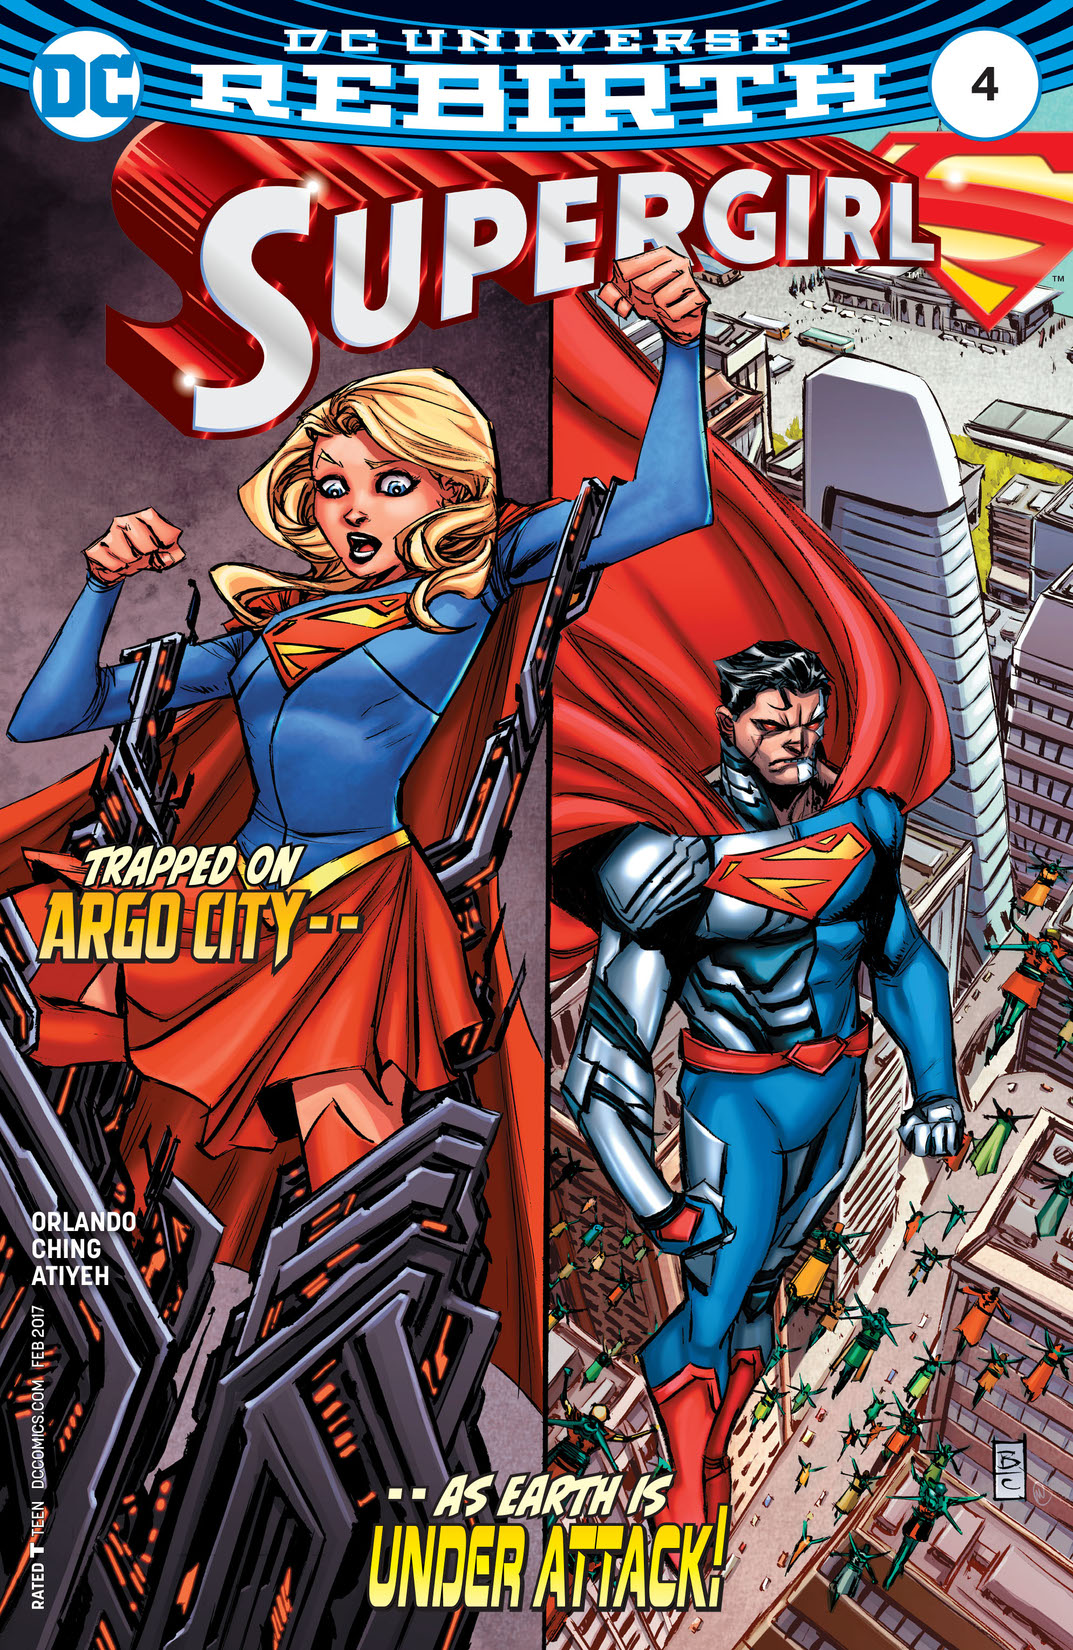 Supergirl (2016-) #4 preview images